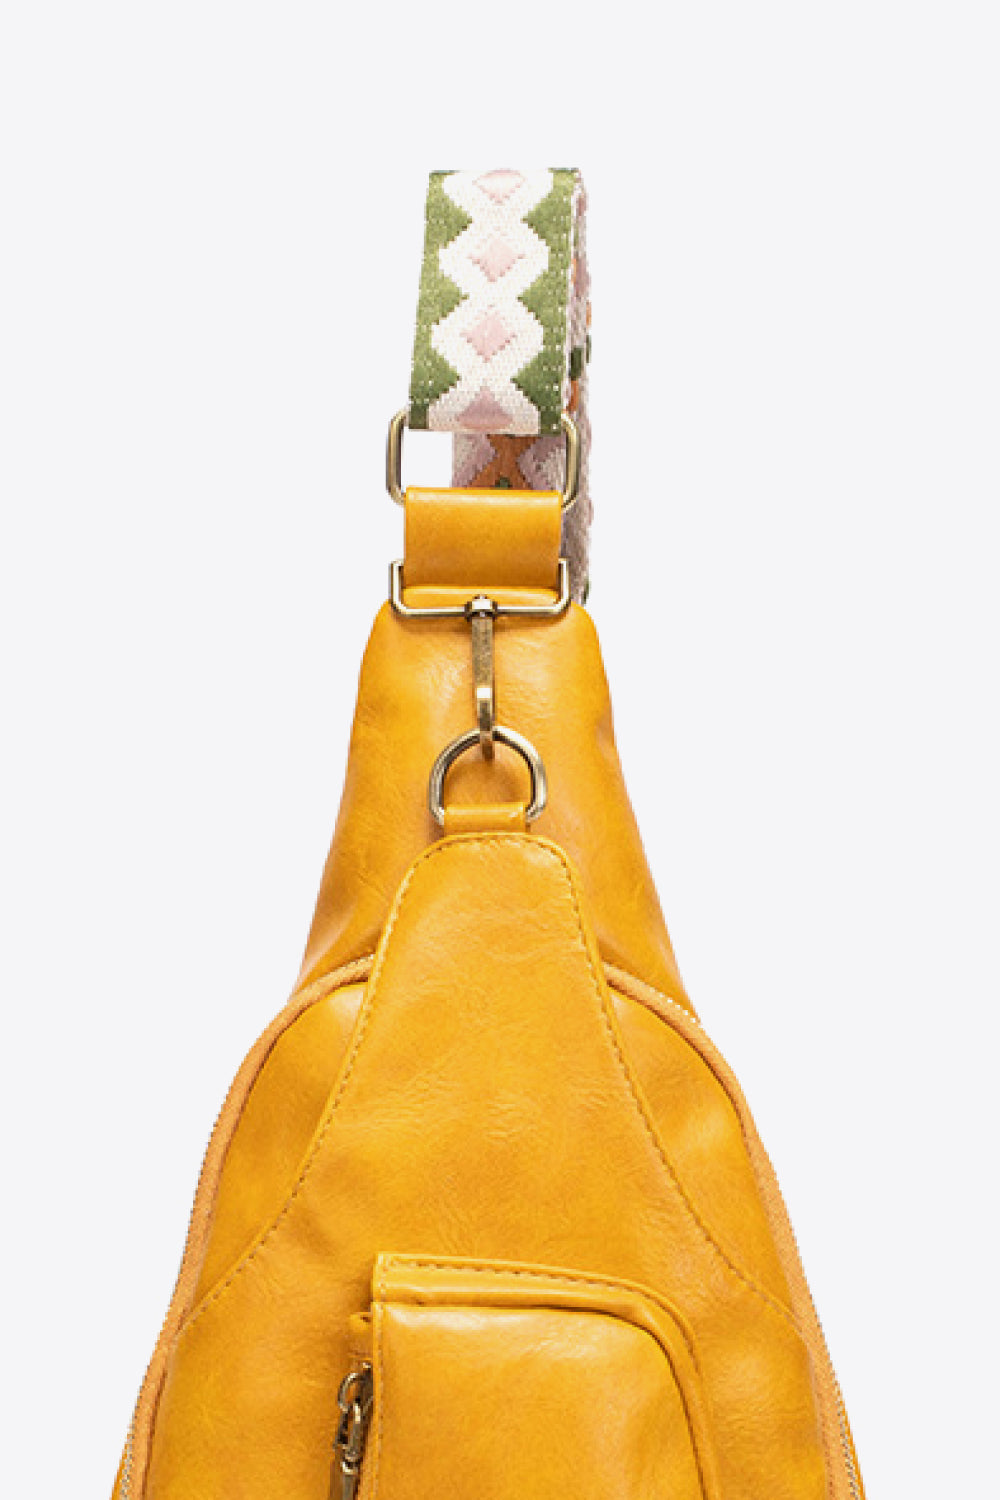 All The Feels PU Leather Sling Bag in an Assortment of Colors!